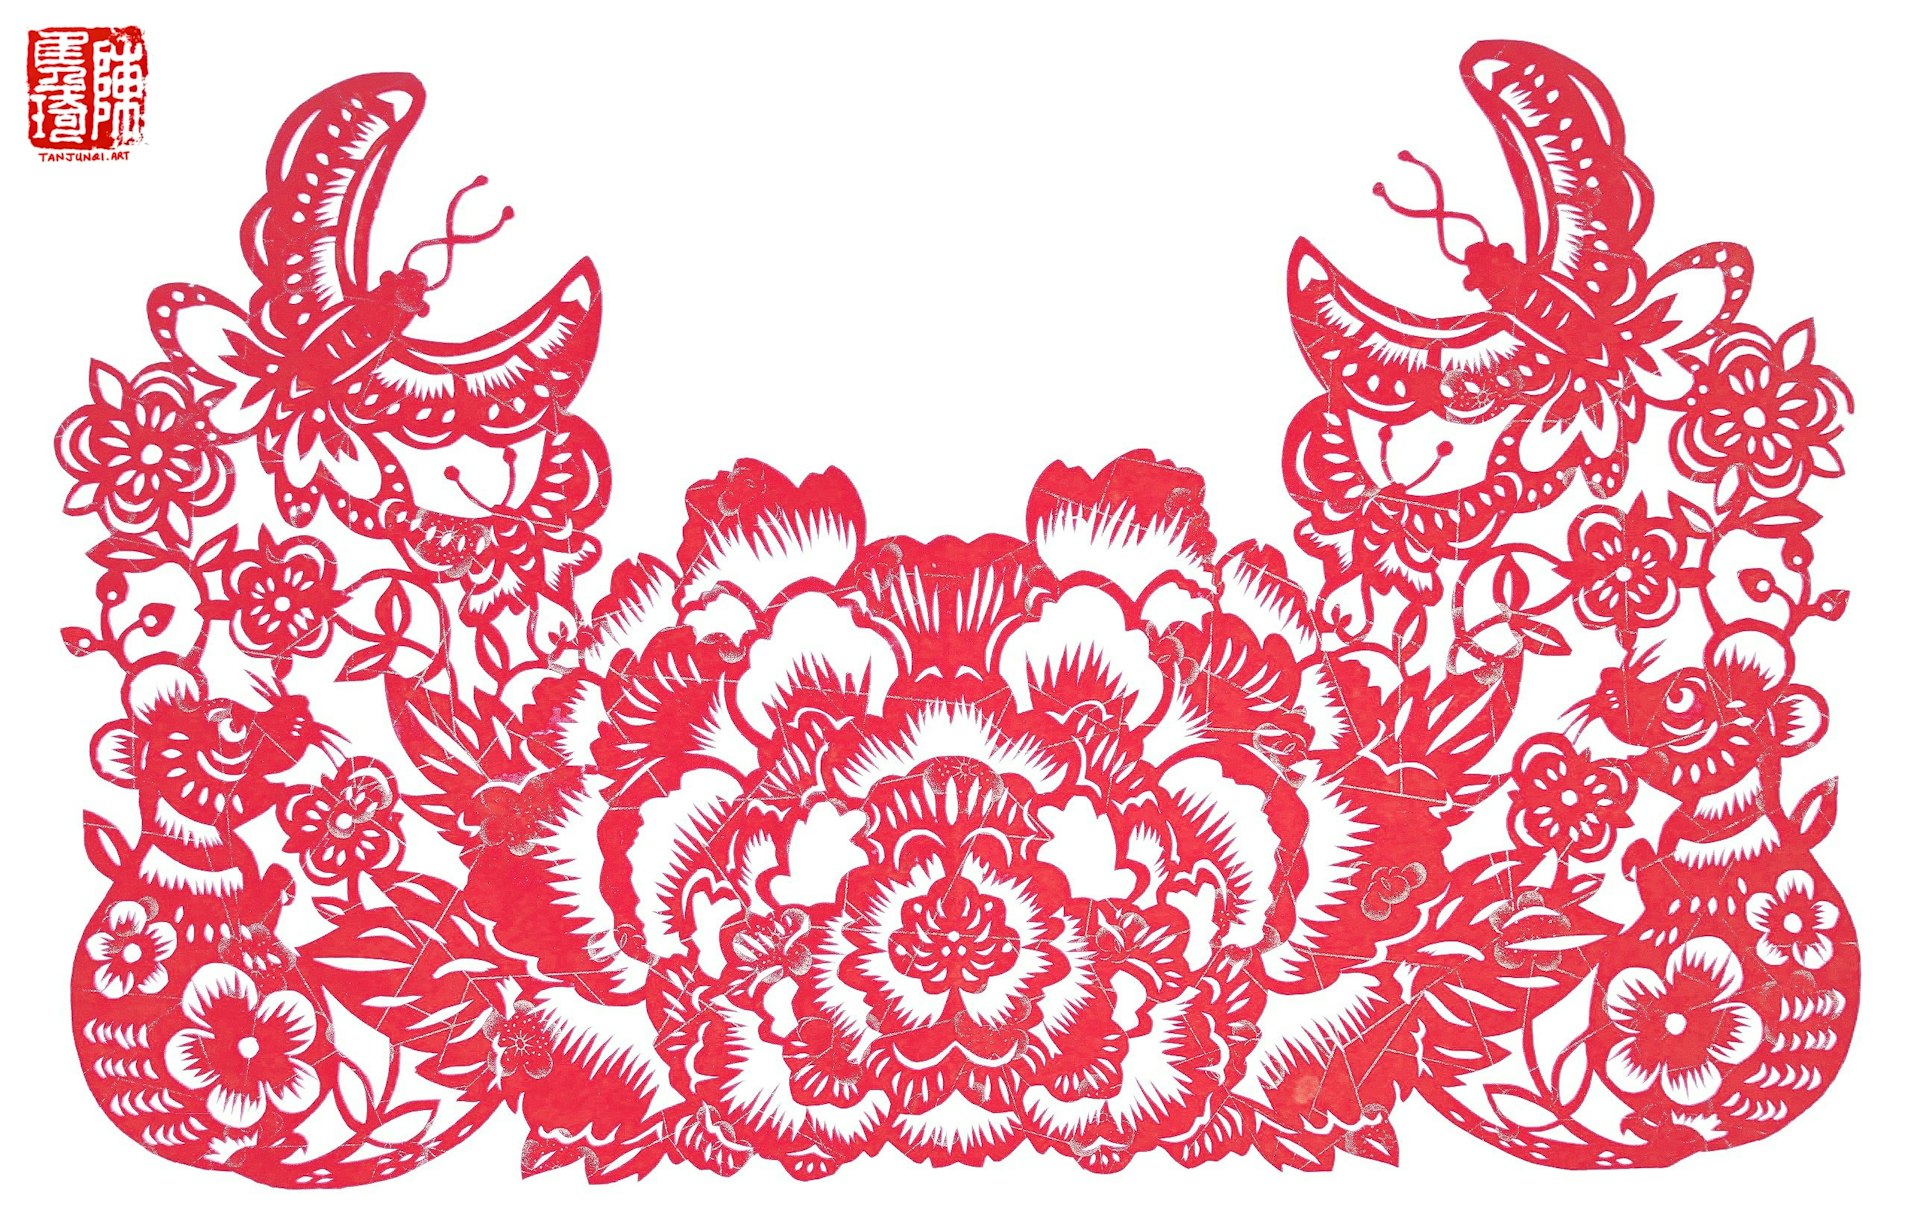 Symmetrical Chinese papercut with two rats sitting amongst big flower blossoms admiring butterflies in flight.